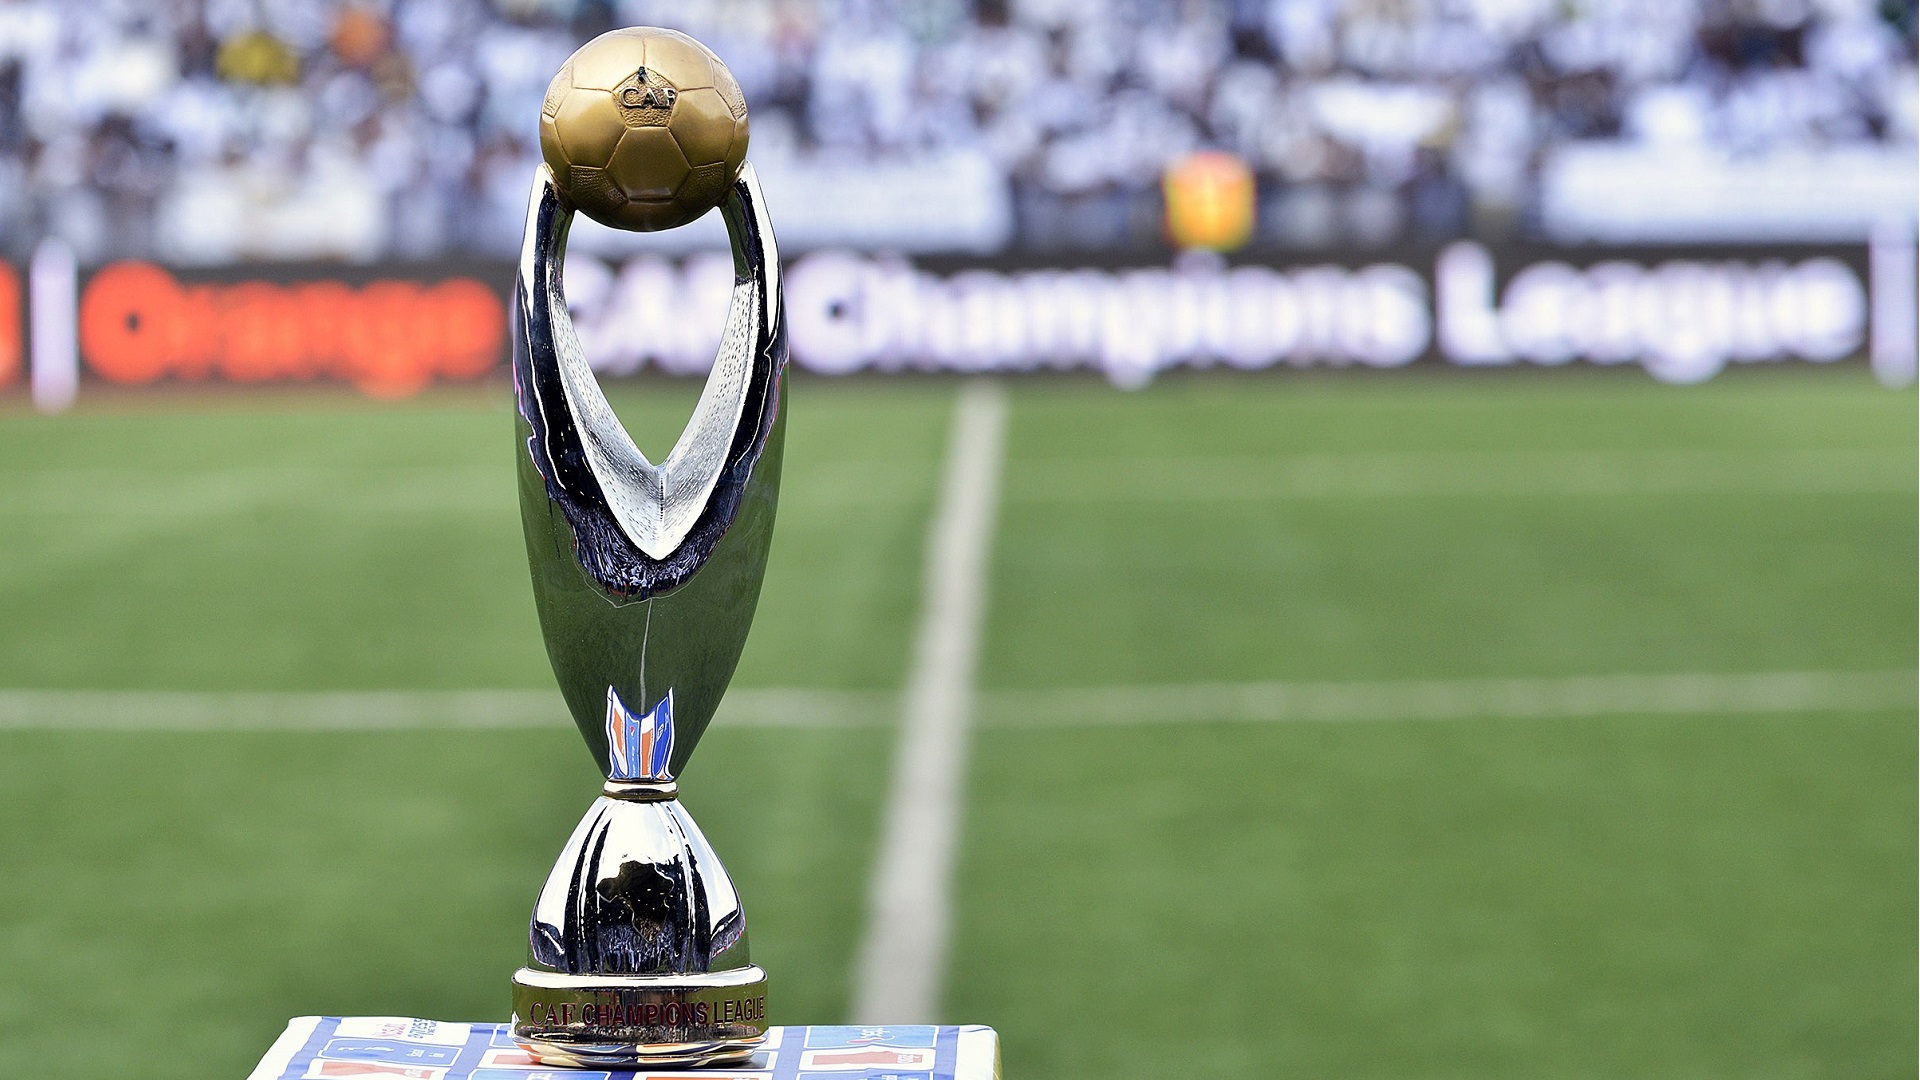 Esperance Edge Tp Mazembe In Caf Champions League Semifinal First